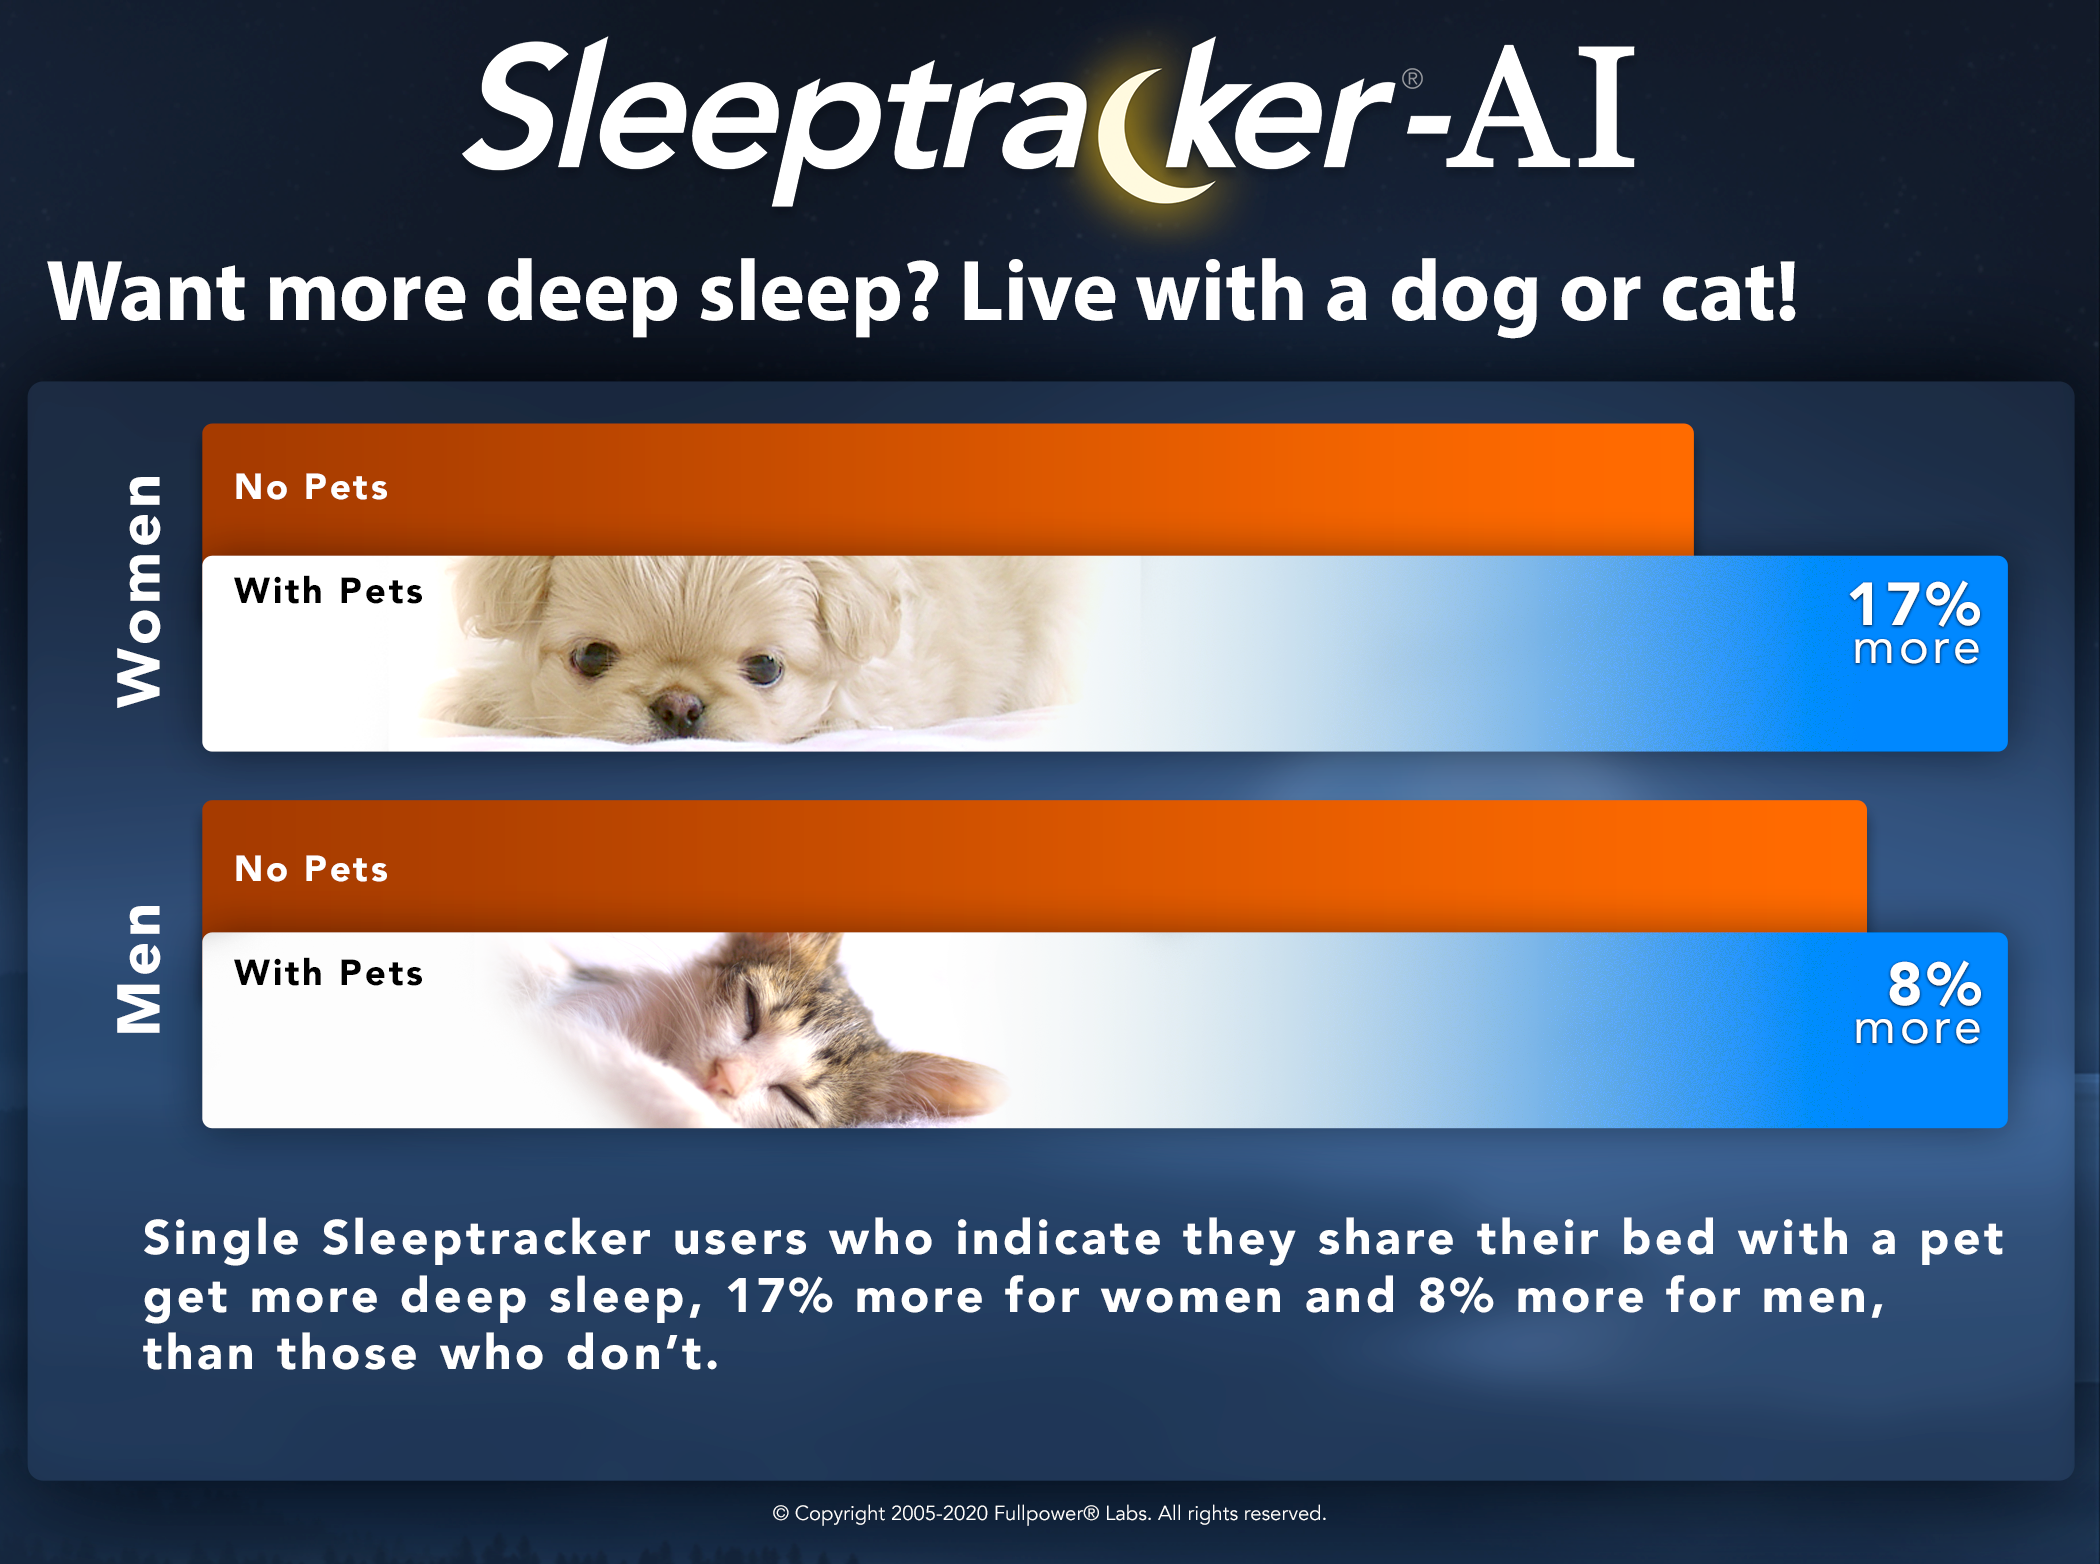 Want more deep sleep? Live with a cat or dog!